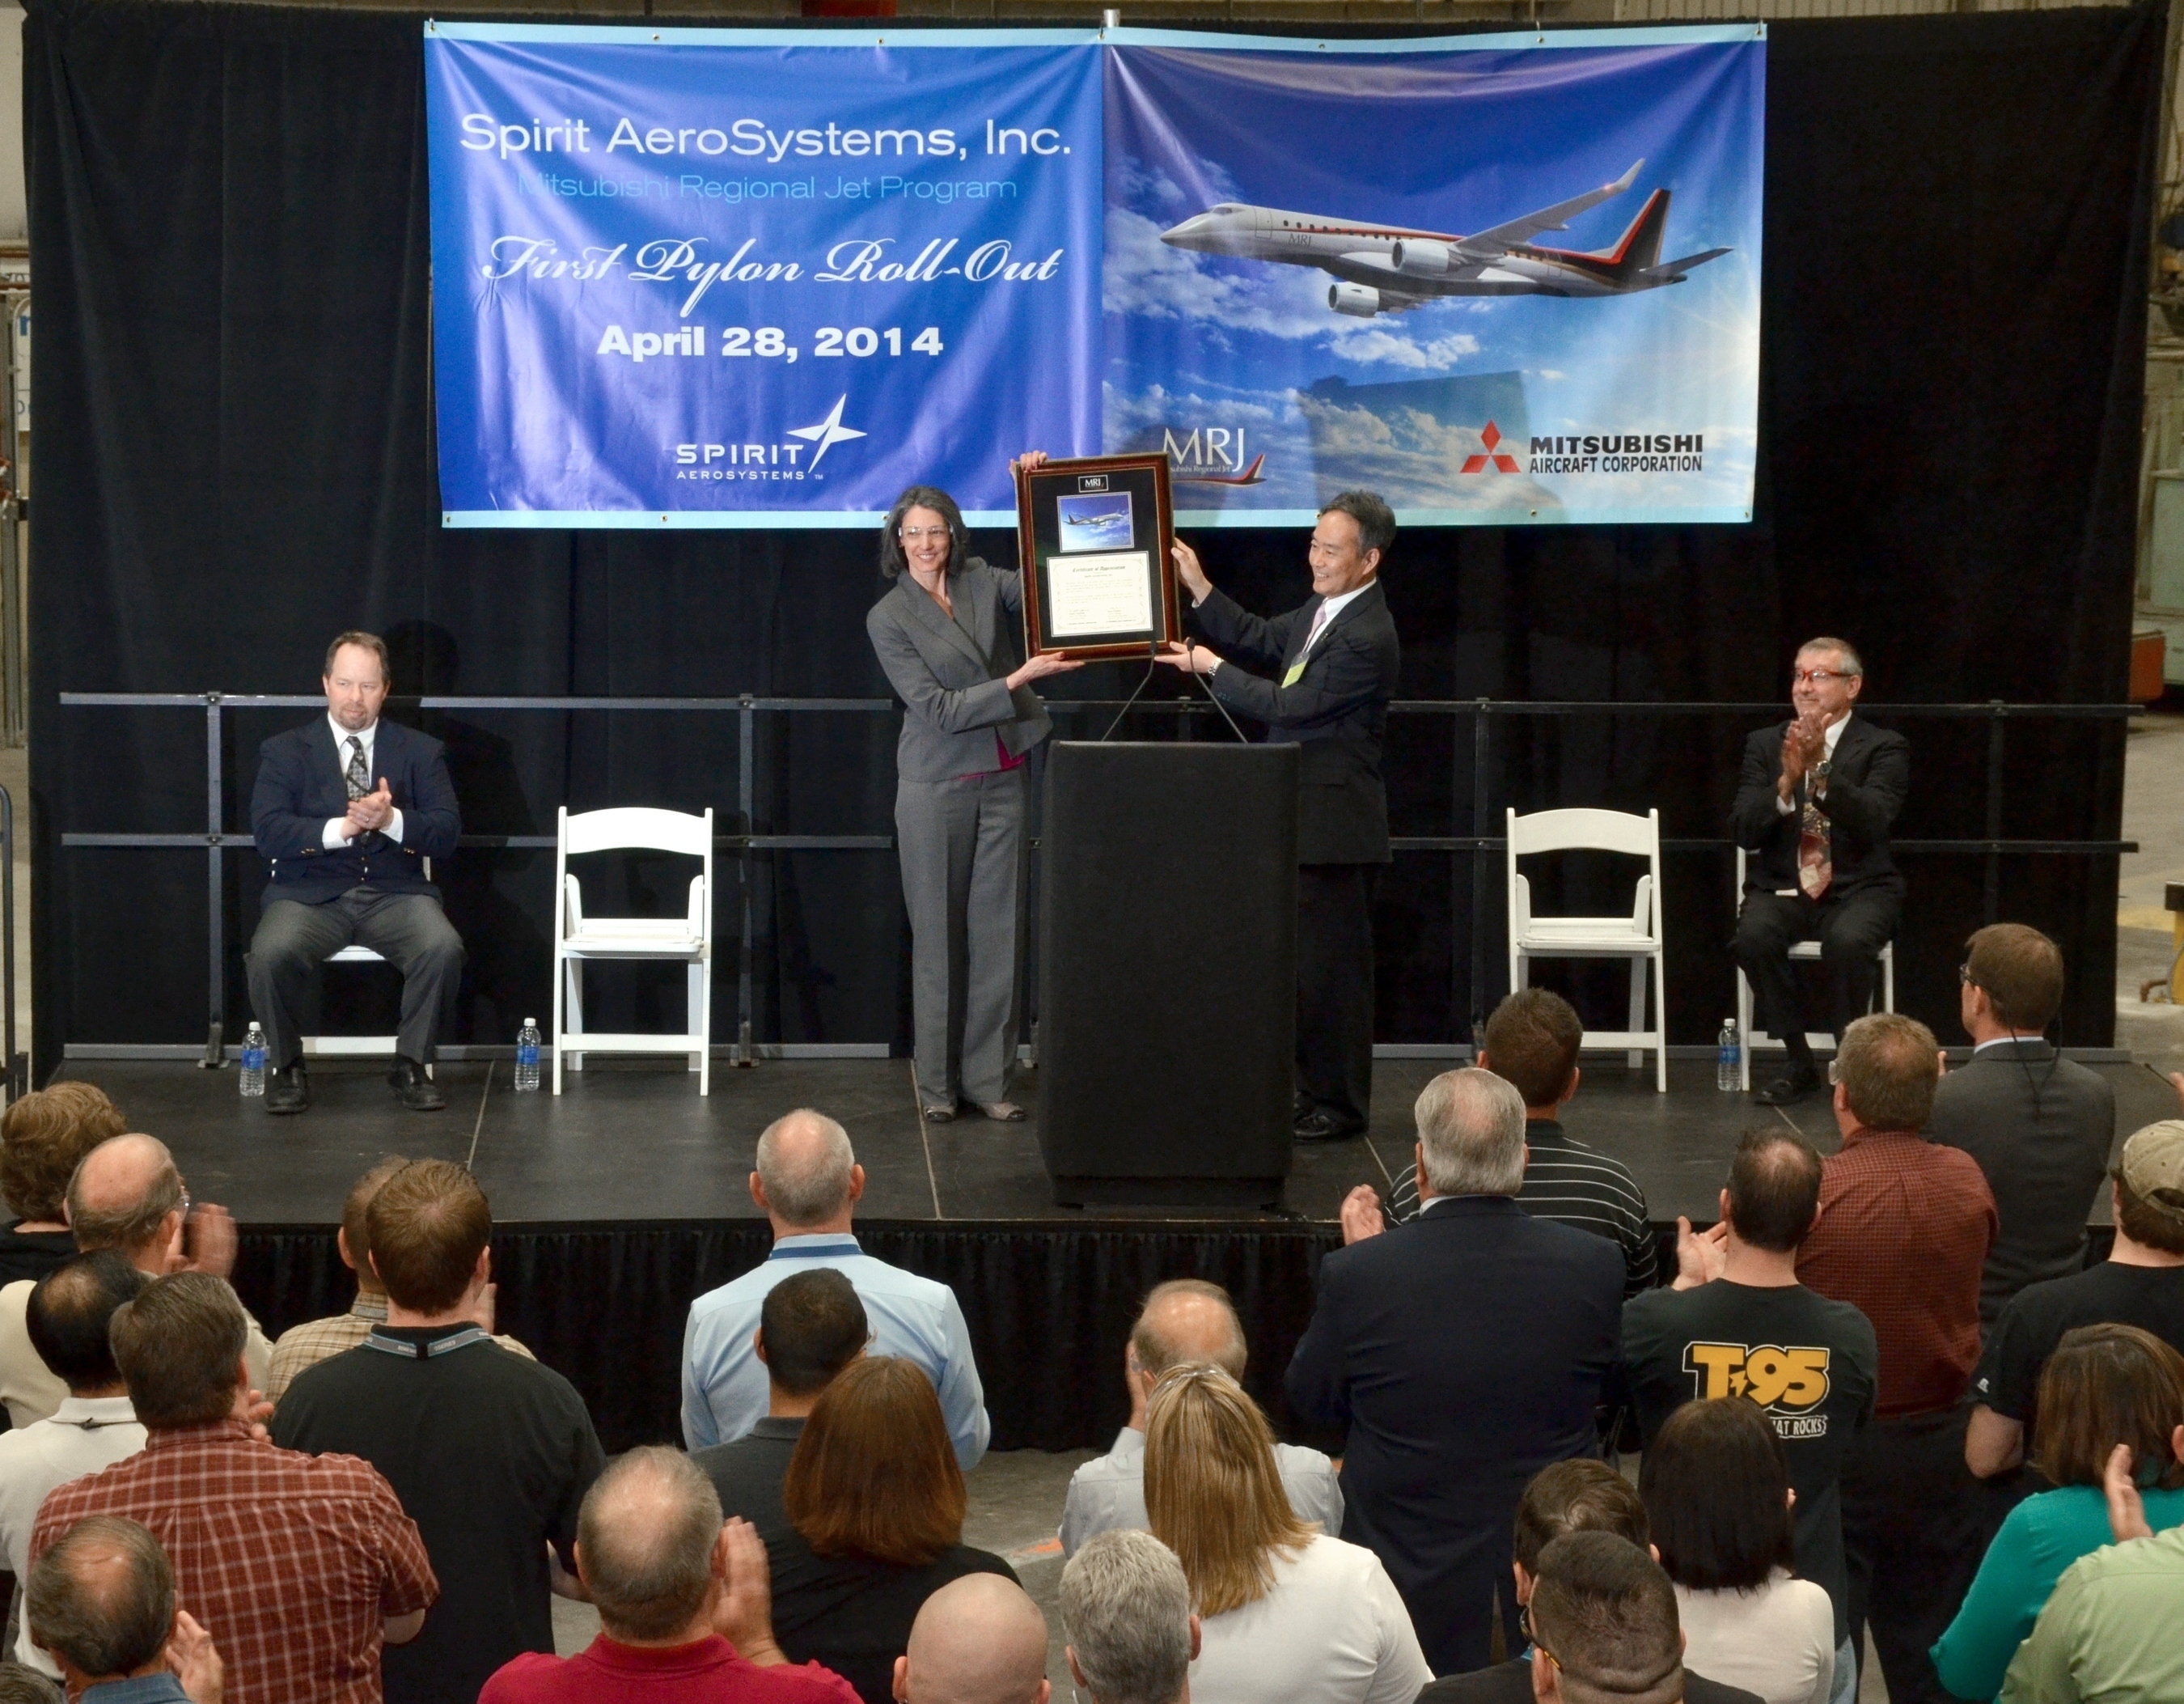 Vice President of Supply Chain for Mitsubishi Aircraft, Fujimori-san, presents a plaque to Spirit AeroSystems Director of Business & Regional Jet programs, Cathy McClain at a celebration marking the delivery of the first test flight pylon for the Mitsubishi Regional Jet. (PRNewsFoto/Spirit AeroSystems, Inc.) (PRNewsFoto/Spirit AeroSystems, Inc.)